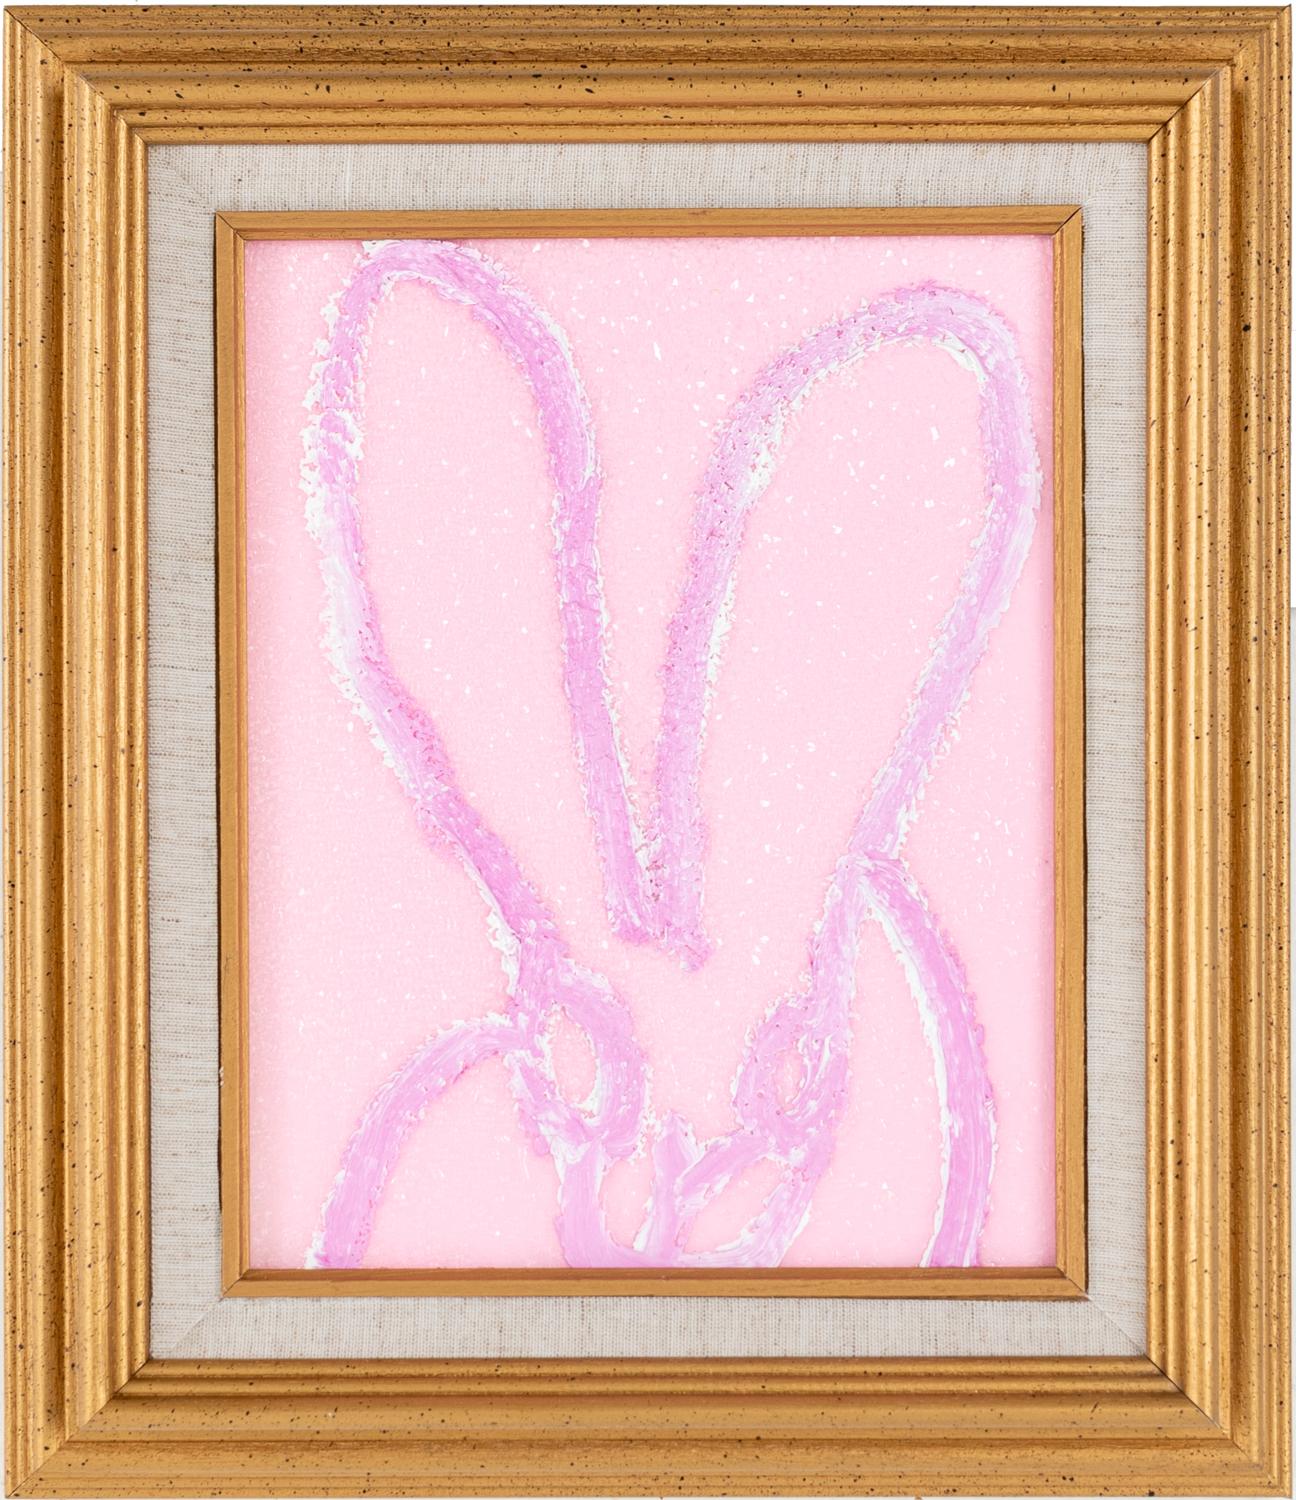 Hunt Slonem Figurative Painting - Queen of Bavaria "Bunny Painting" Original Pink Oil Painting in Vintage Frame